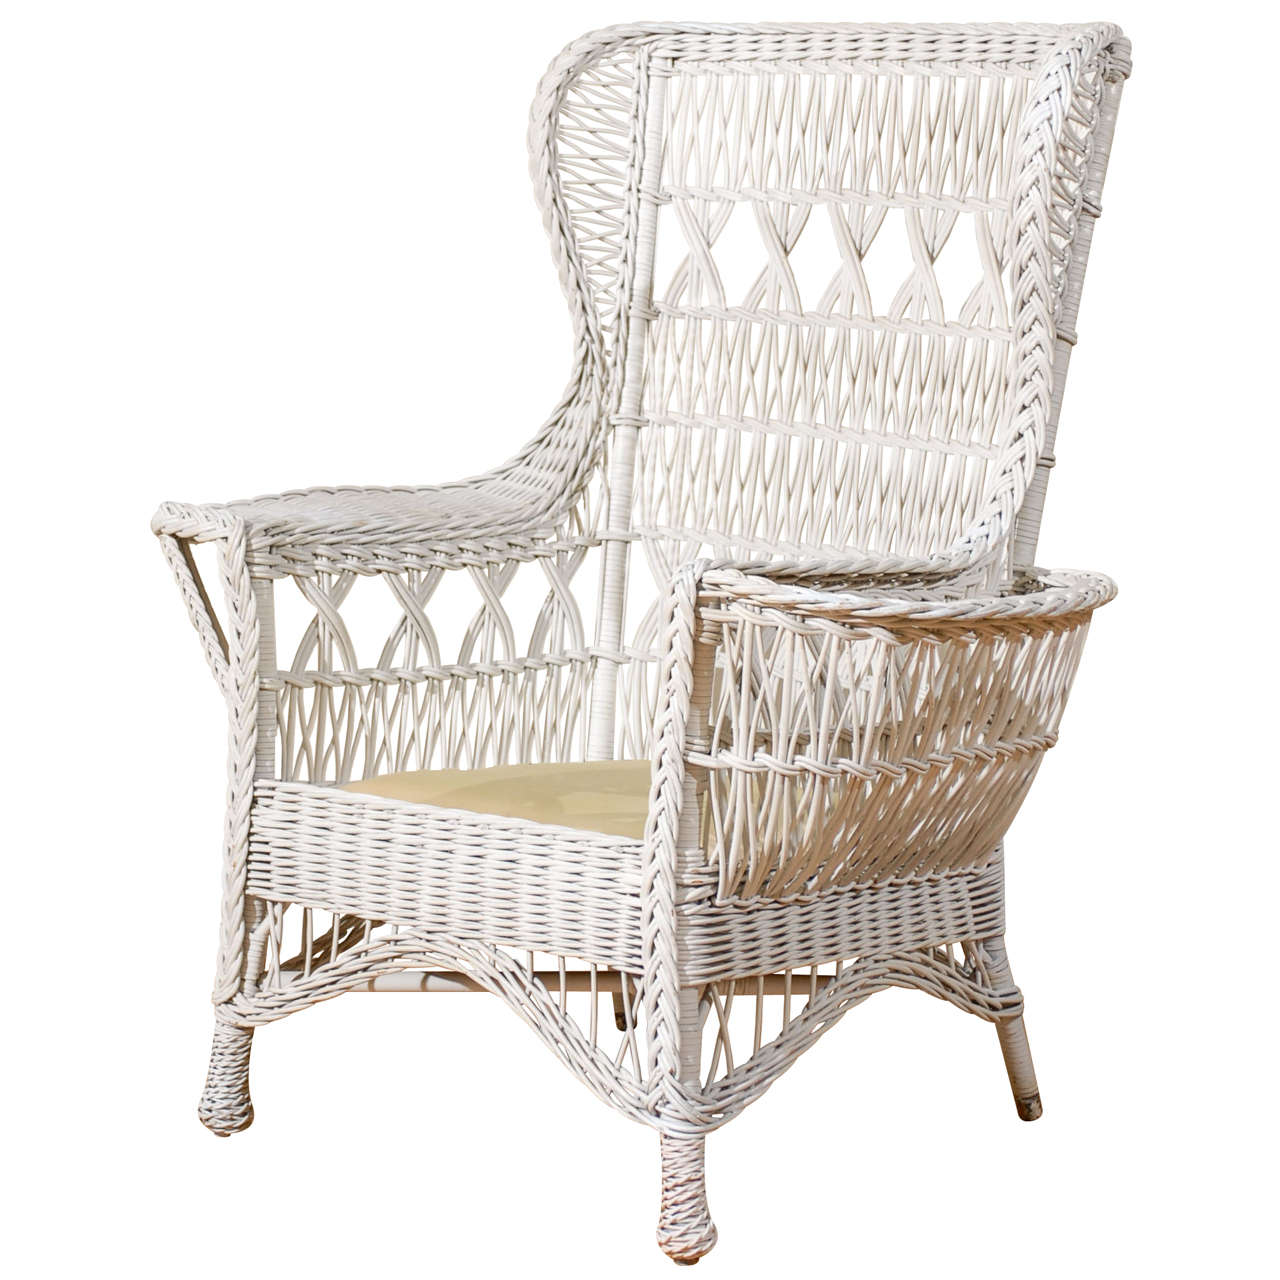 Antique American Wicker Wing Chair With Magazine Pocket At 1stdibs